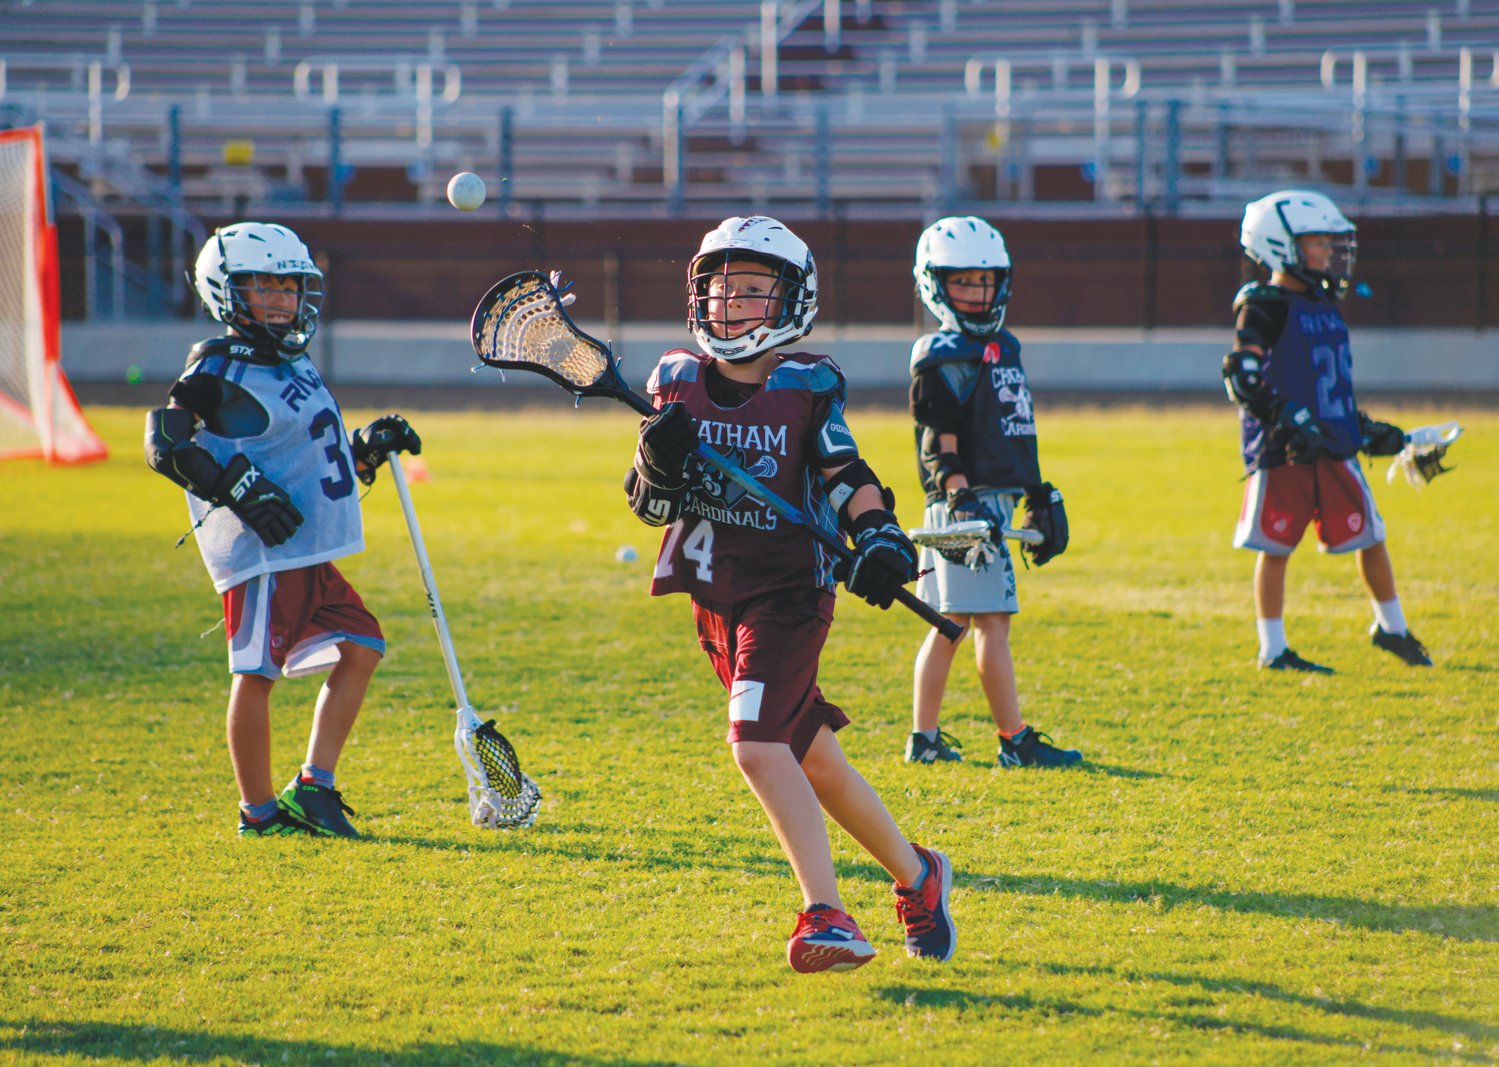 Camper Thomas Greto (center) works on passing during Seaforth's first-ever youth lacrosse camp last Thursday. The 4-day camp featured nearly 60 participants that performed drills, learned fundamentals and played games on the field at Seaforth High School.